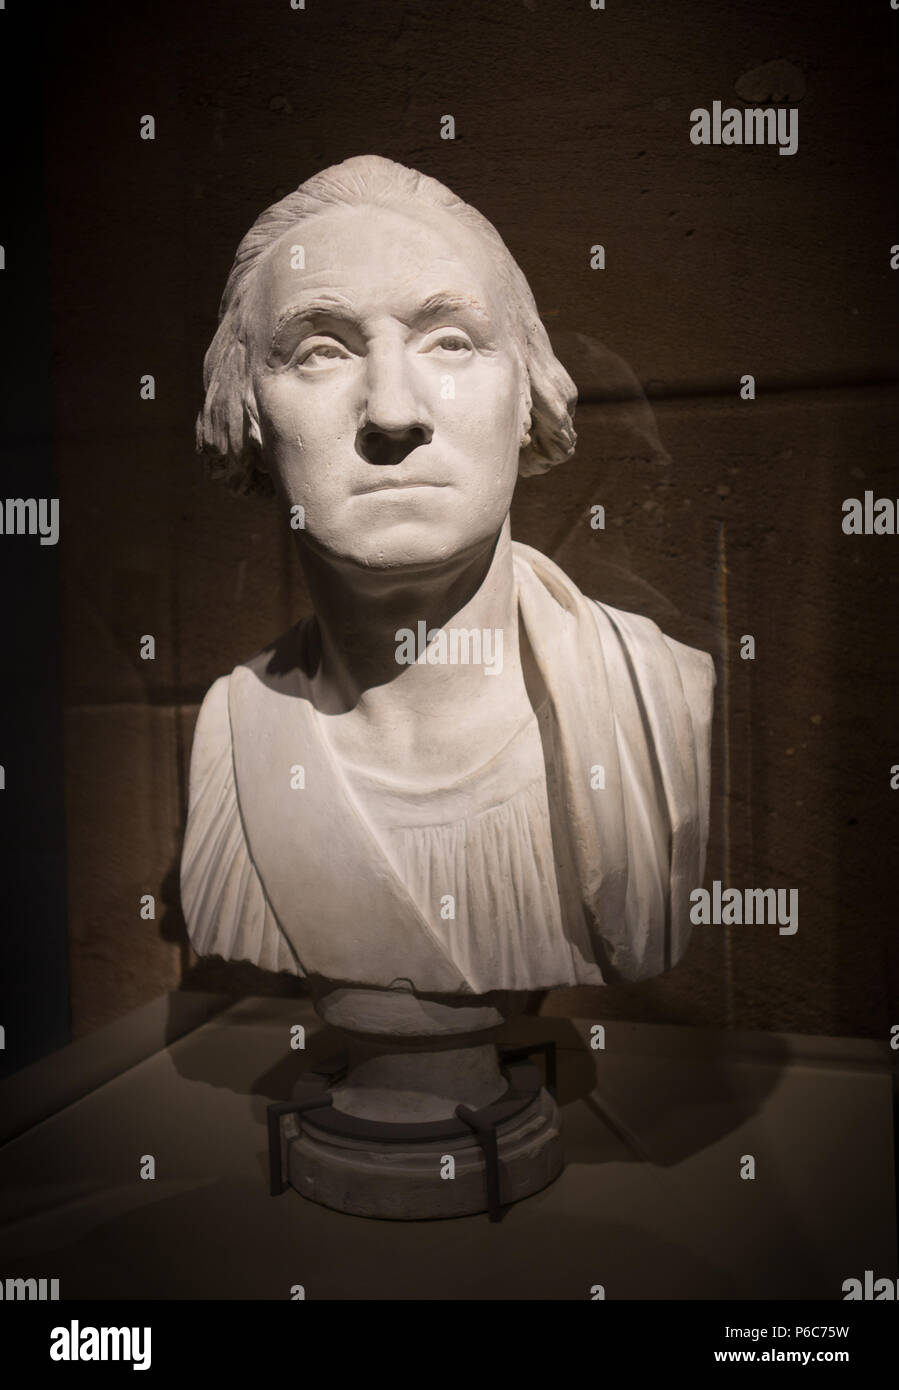 A bust of president George Washington by sculptor Jean-Antoine Houdon, on display at the National Portrait Gallery, Washington, DC, USA Stock Photo